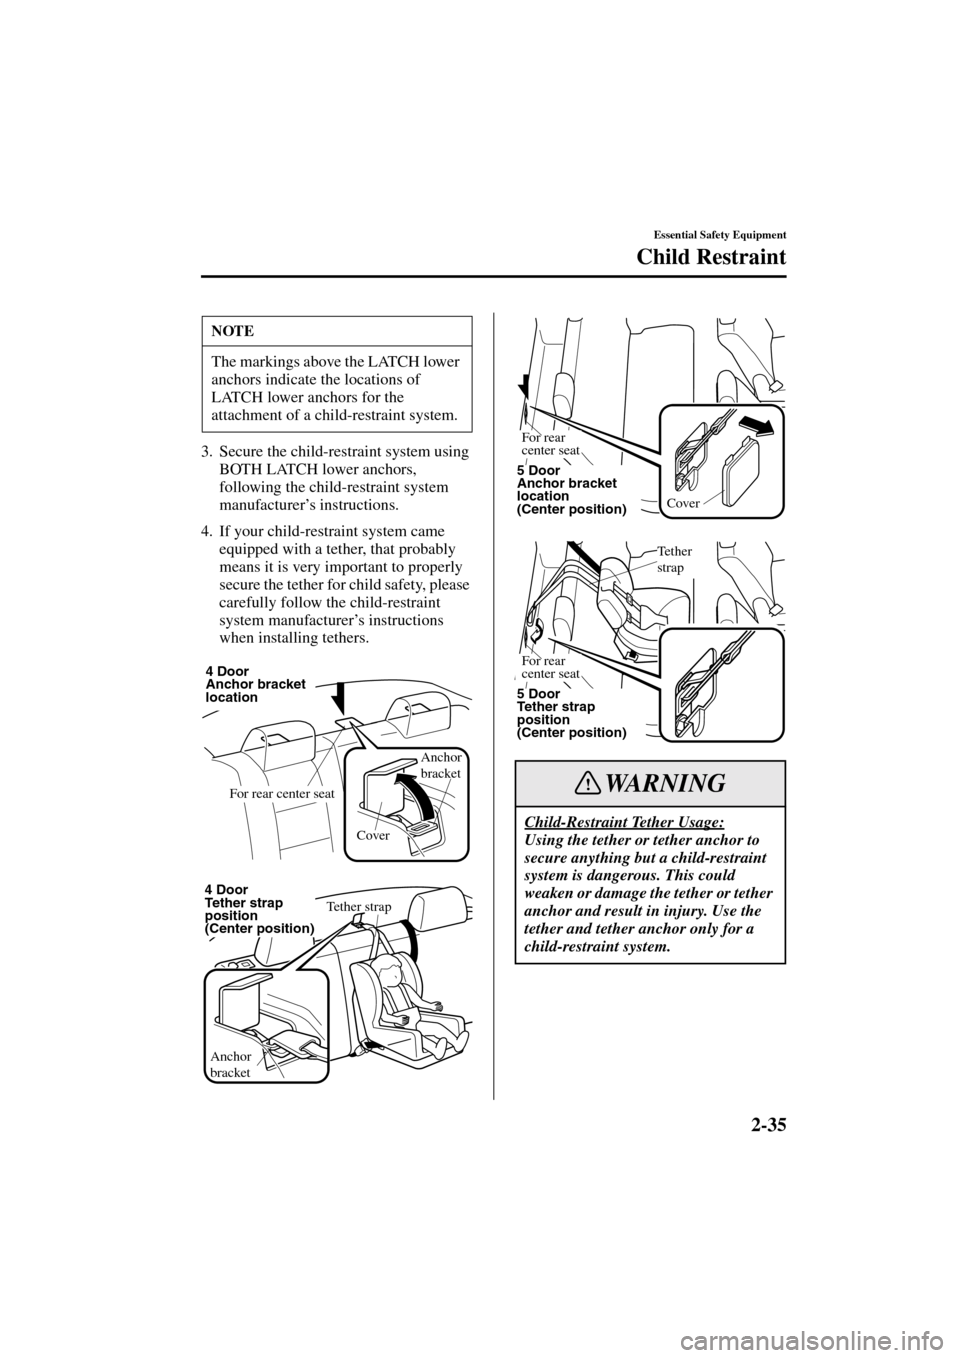 MAZDA MODEL 3 HATCHBACK 2004   (in English) Service Manual 2-35
Essential Safety Equipment
Child Restraint
Form No. 8S18-EA-03I
3. Secure the child-restraint system using 
BOTH LATCH lower anchors, 
following the child-restraint system 
manufacturer’s instr